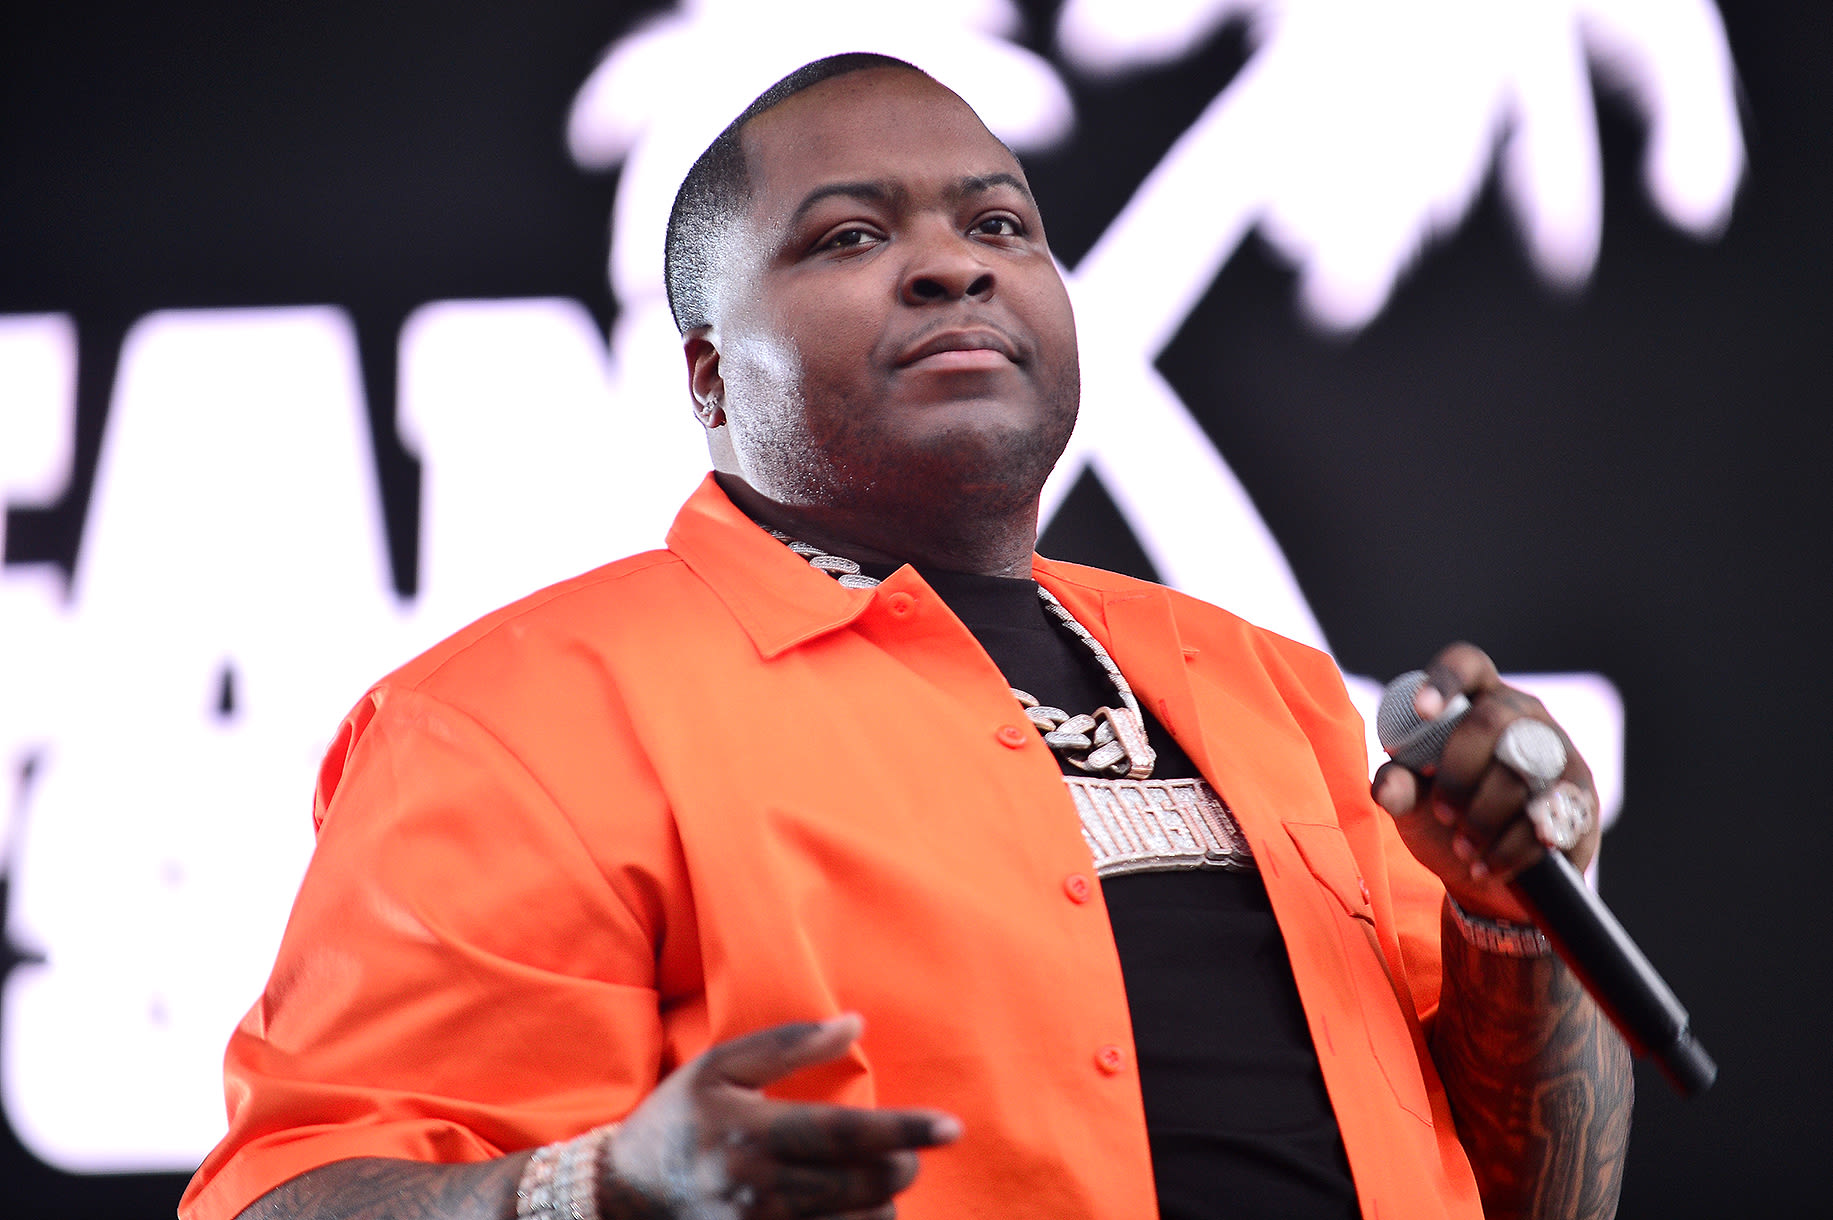 Sean Kingston’s Mother Arrested on Fraud and Theft Charges After Raid of Singer’s Home